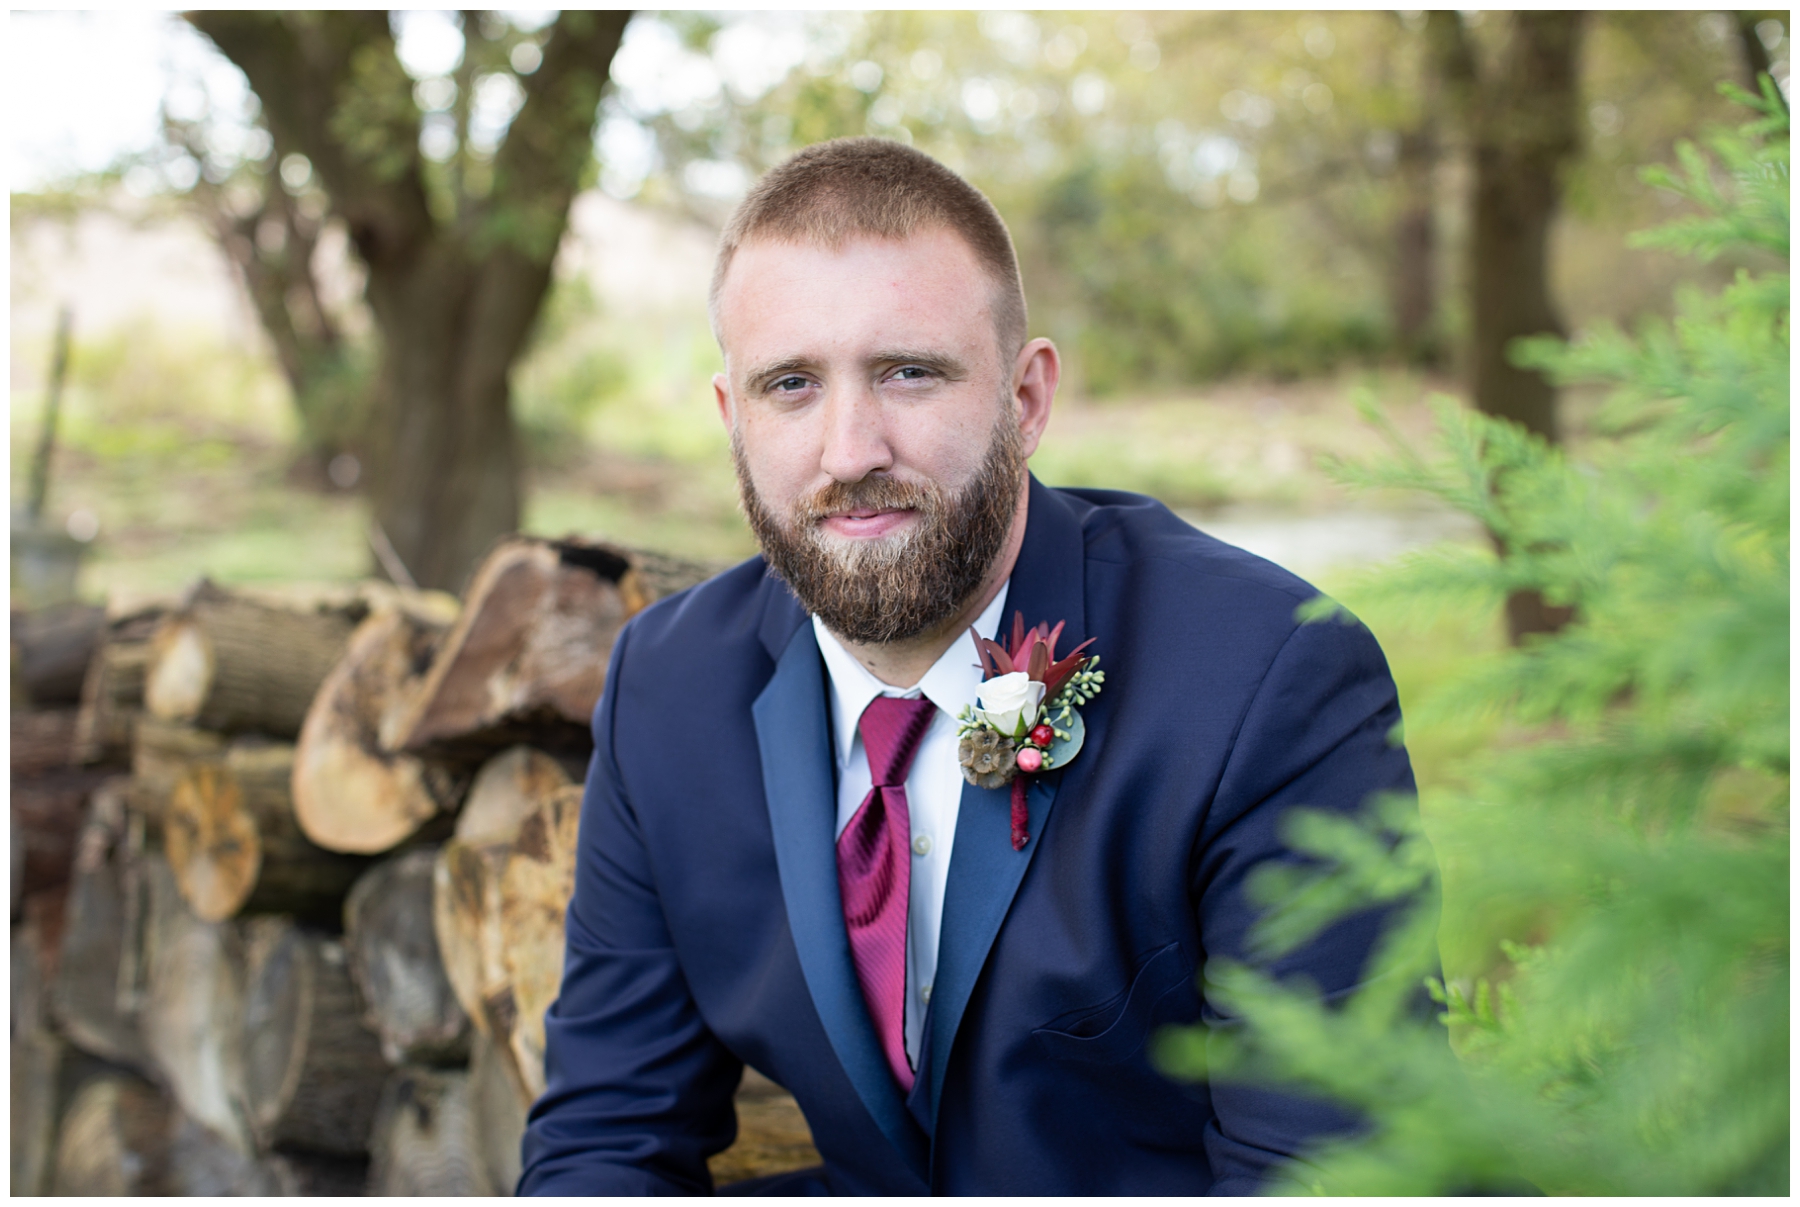 groom portrait outdoors with logs